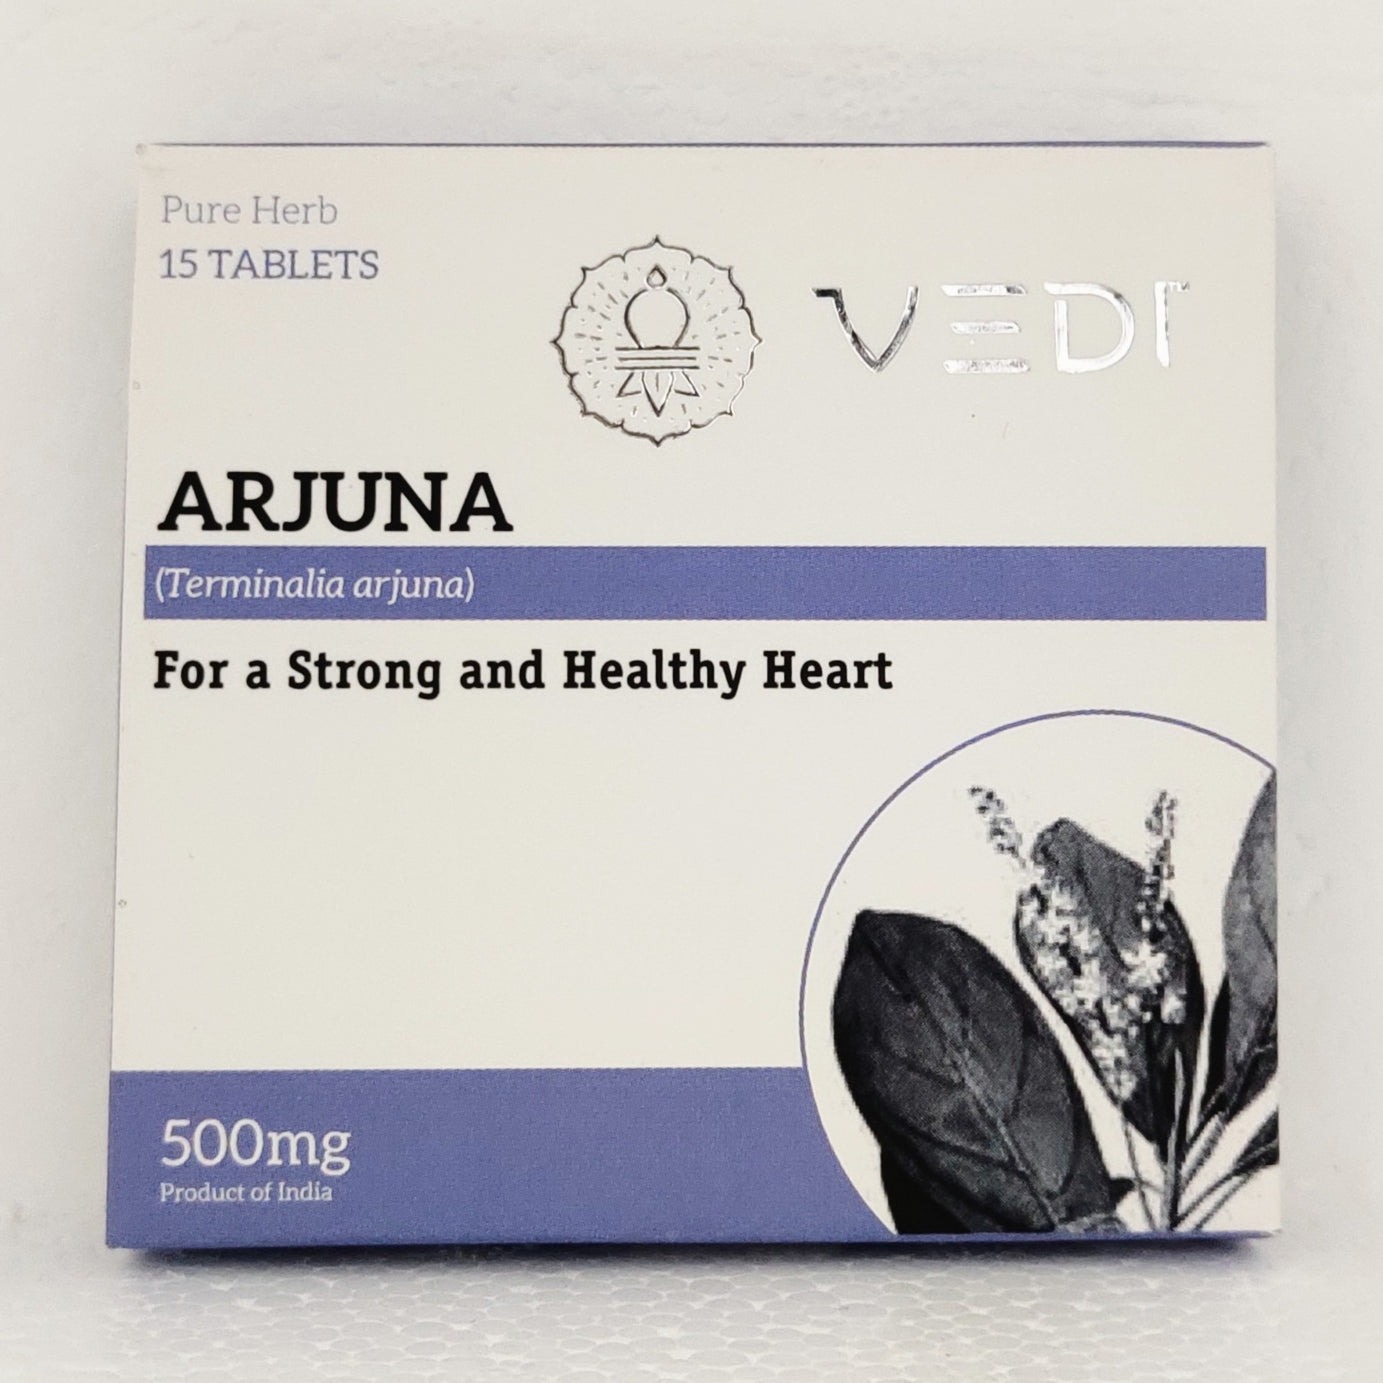 Shop Arjuna tablets - 15tablets at price 85.00 from Vedi Herbals Online - Ayush Care